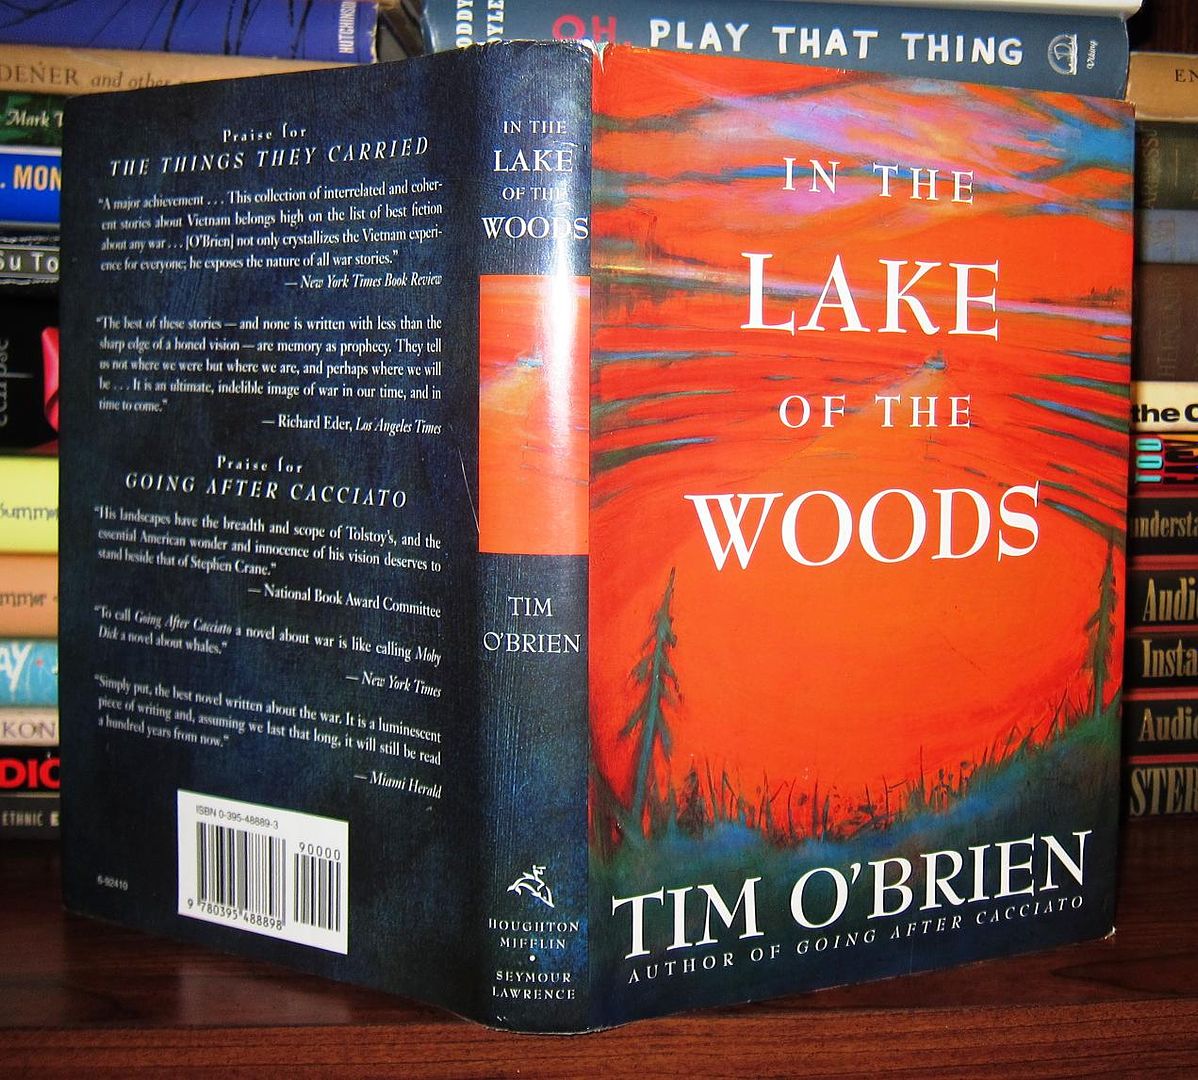 O'BRIEN, TIM - In the Lake of the Woods